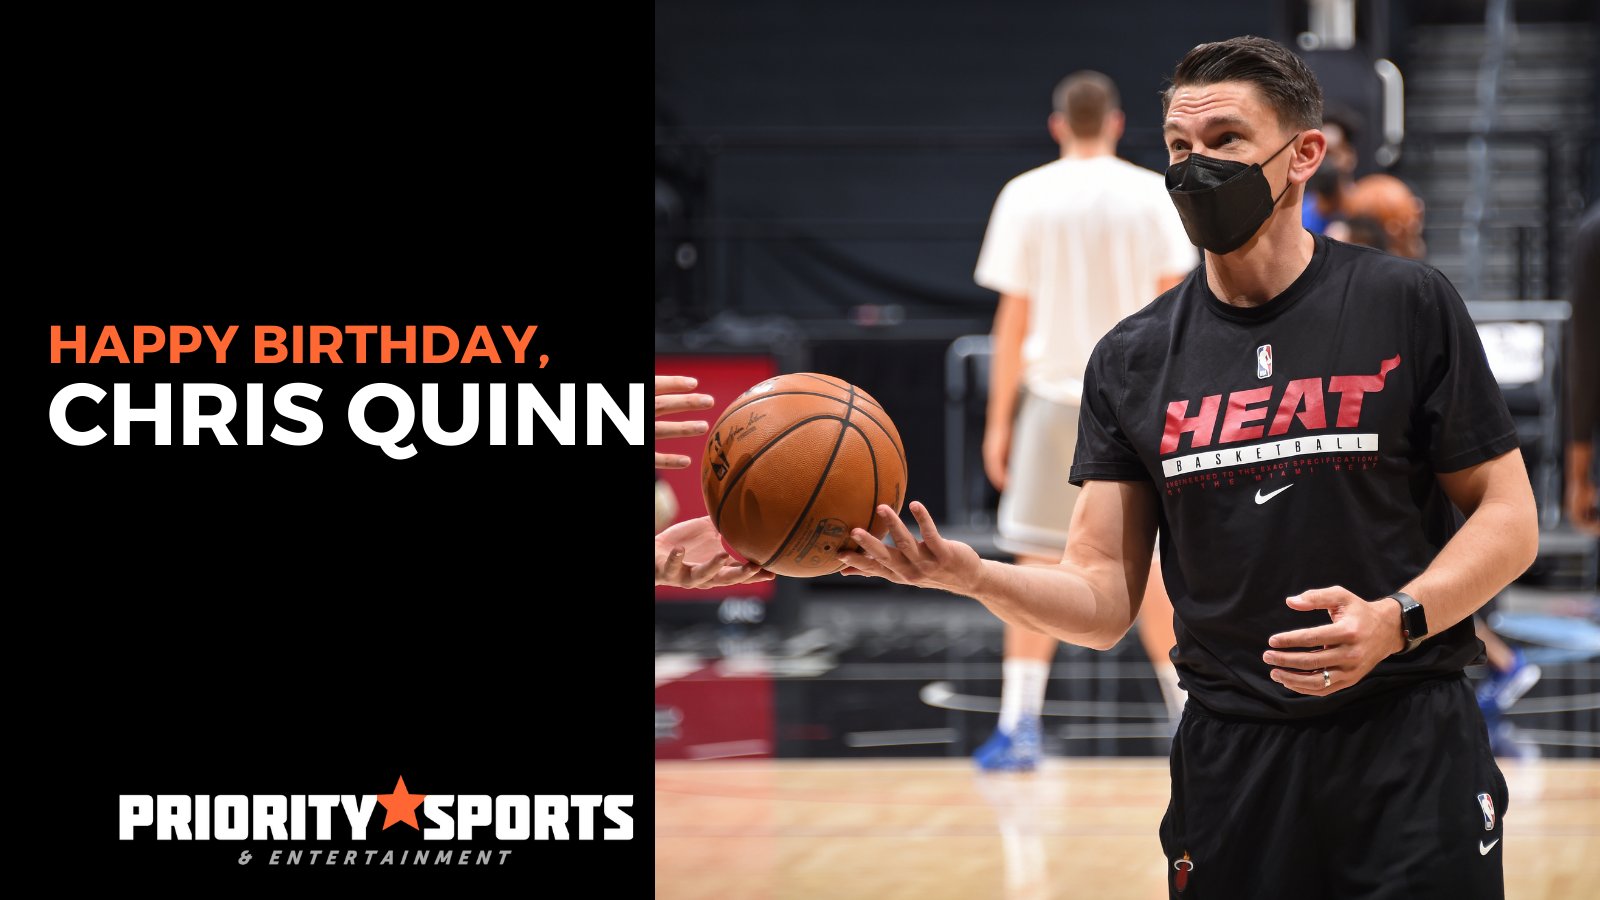 Happy birthday to assistant coach Chris Quinn! 